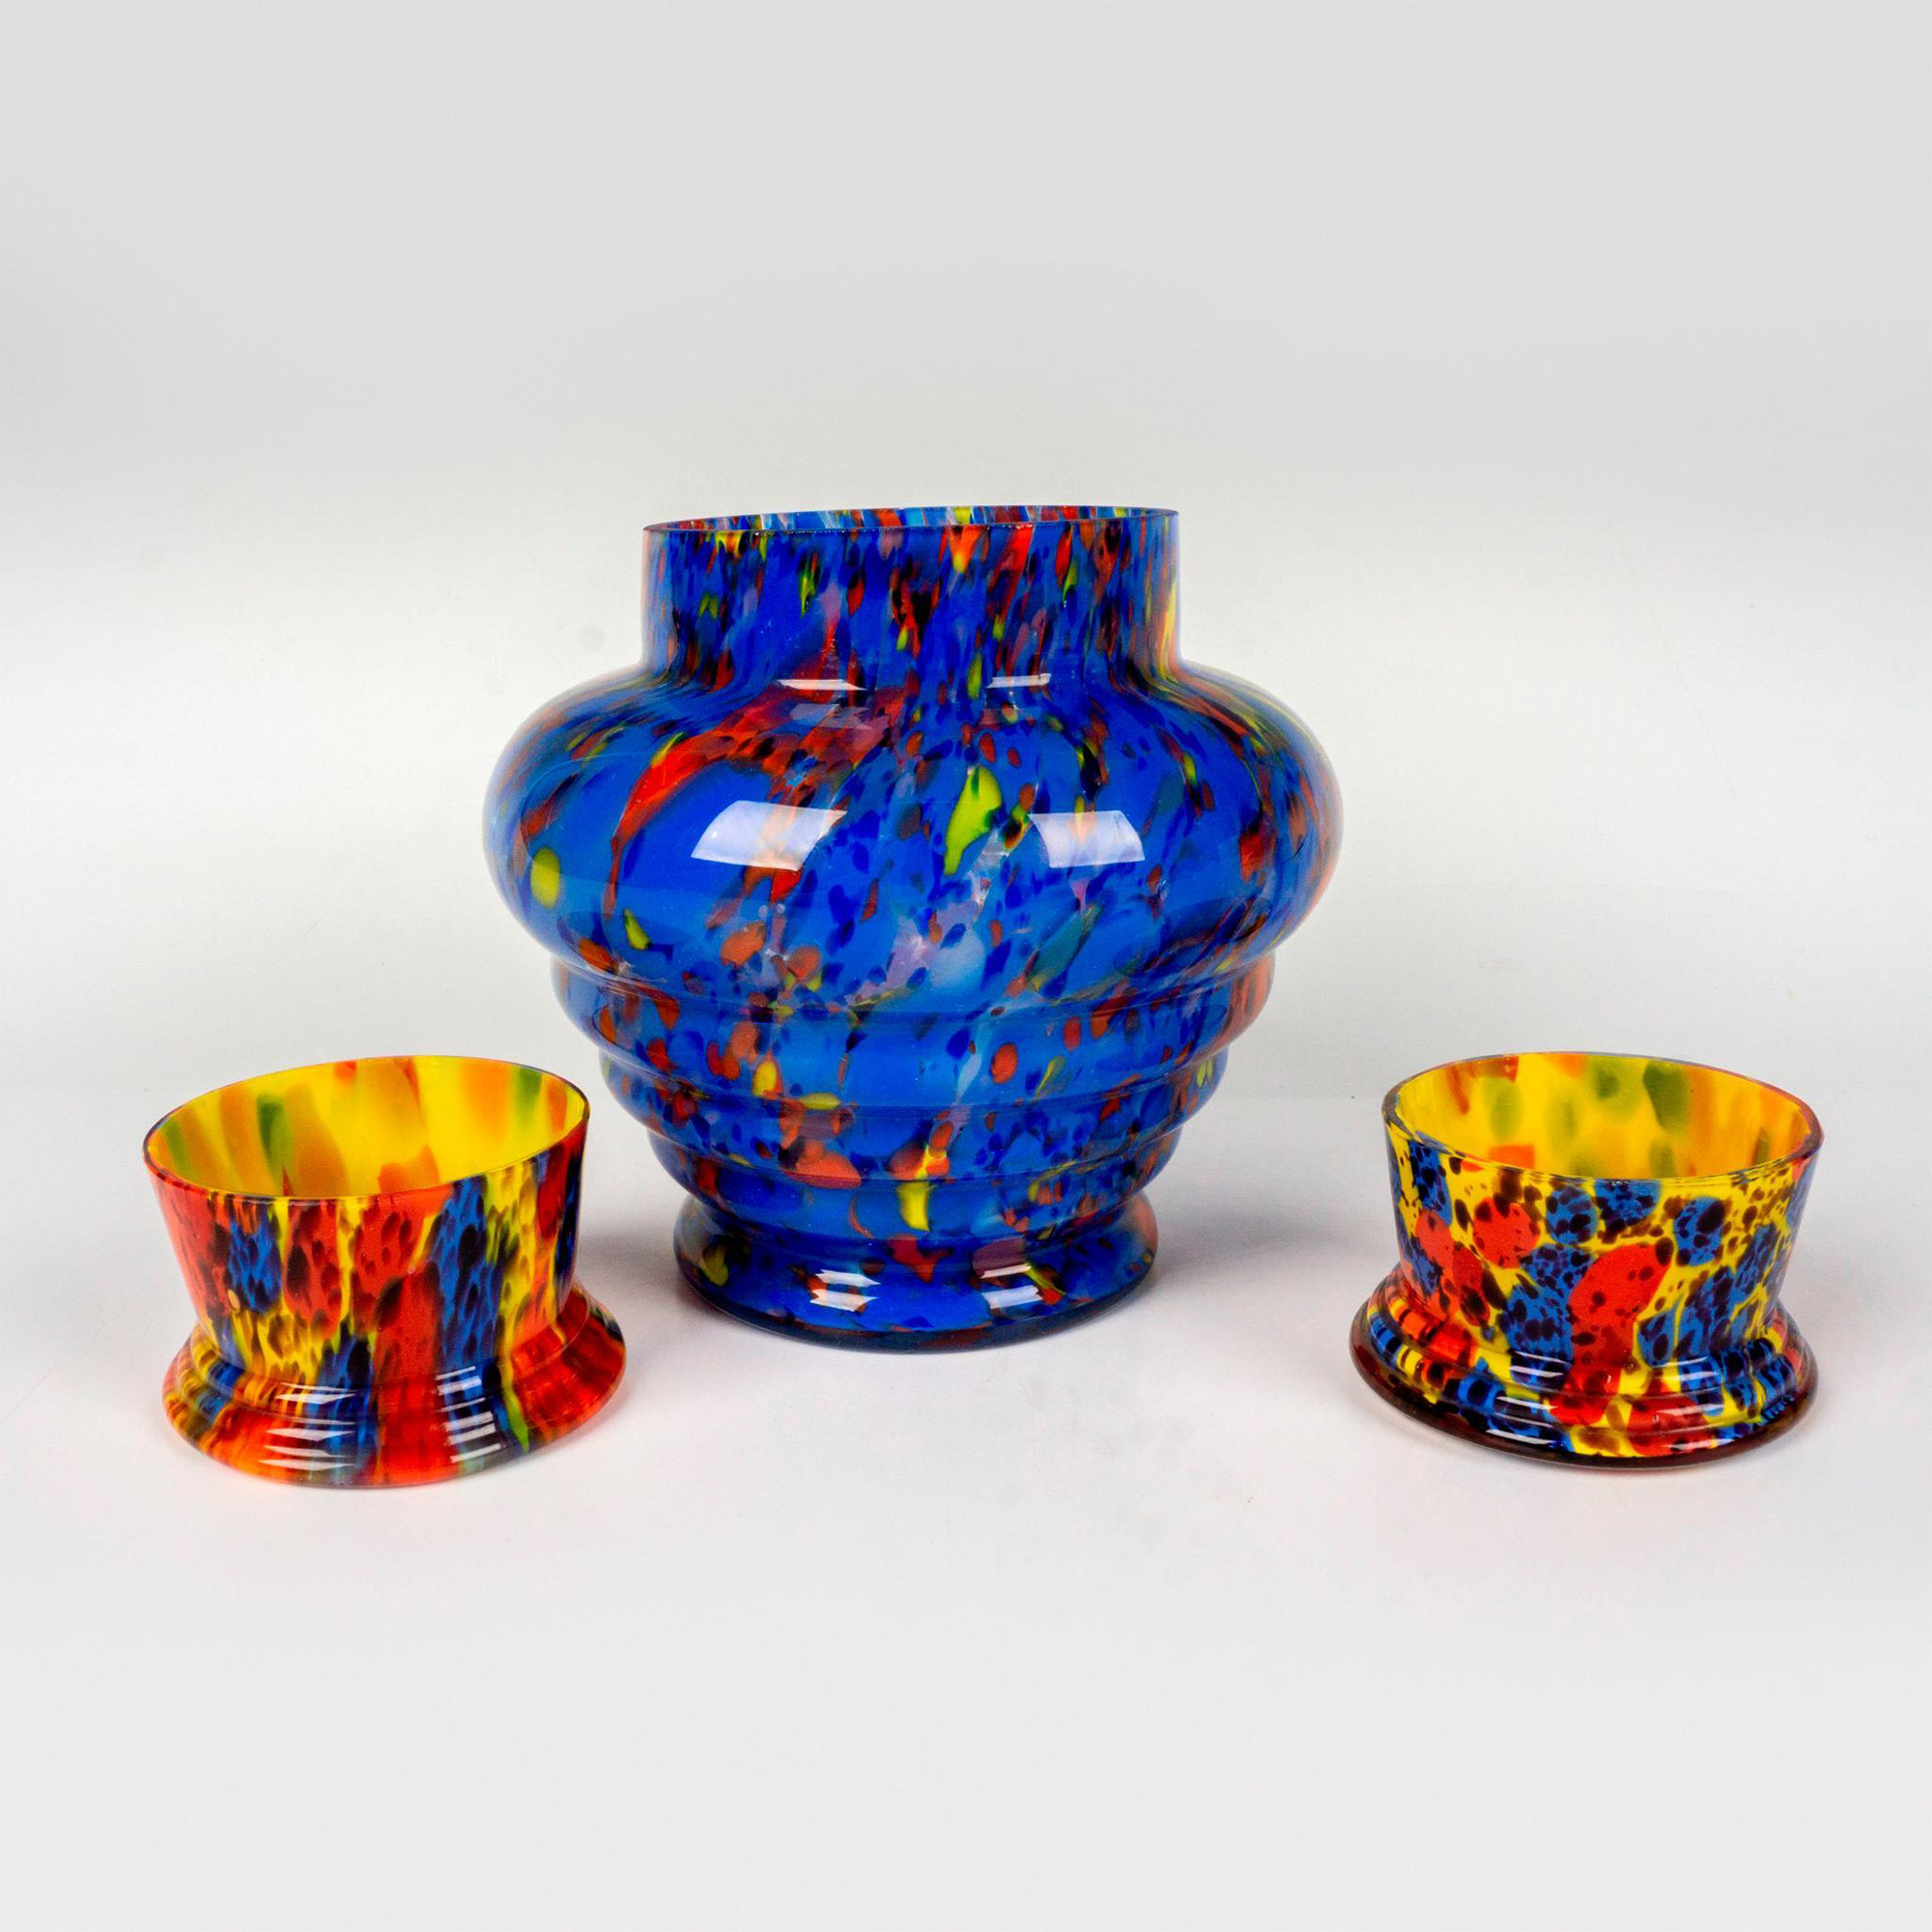 3pc Czech Art Glass Speckled Vases - Image 2 of 3